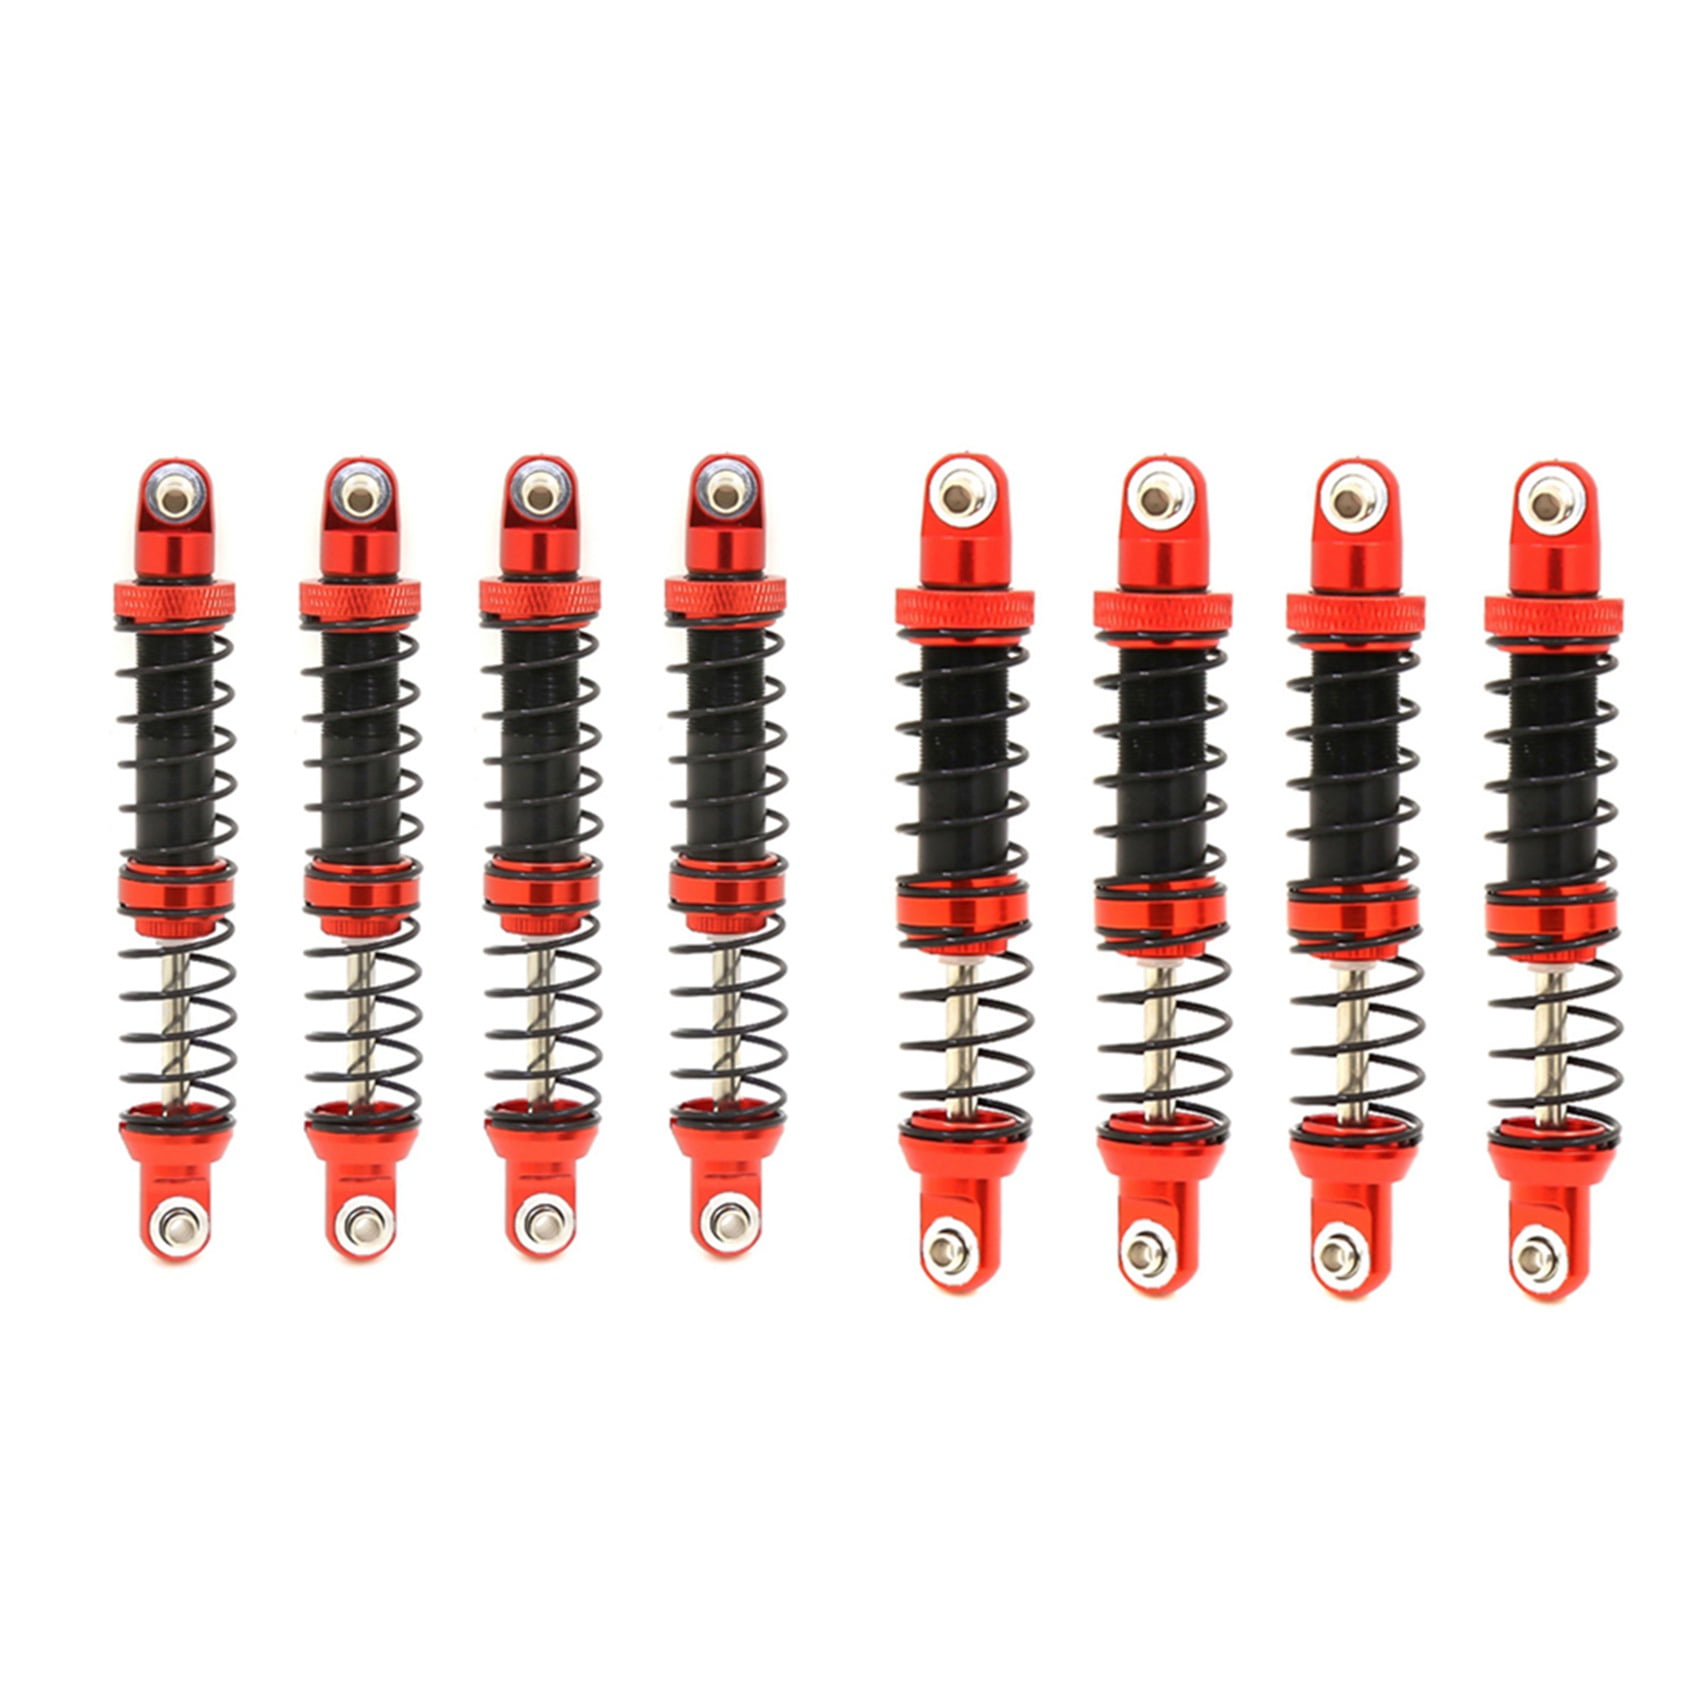 Red Shock Absorber Oil Damper for 1/10 Traxxas TRX4 Axial SCX10 90046 RC Crawler 